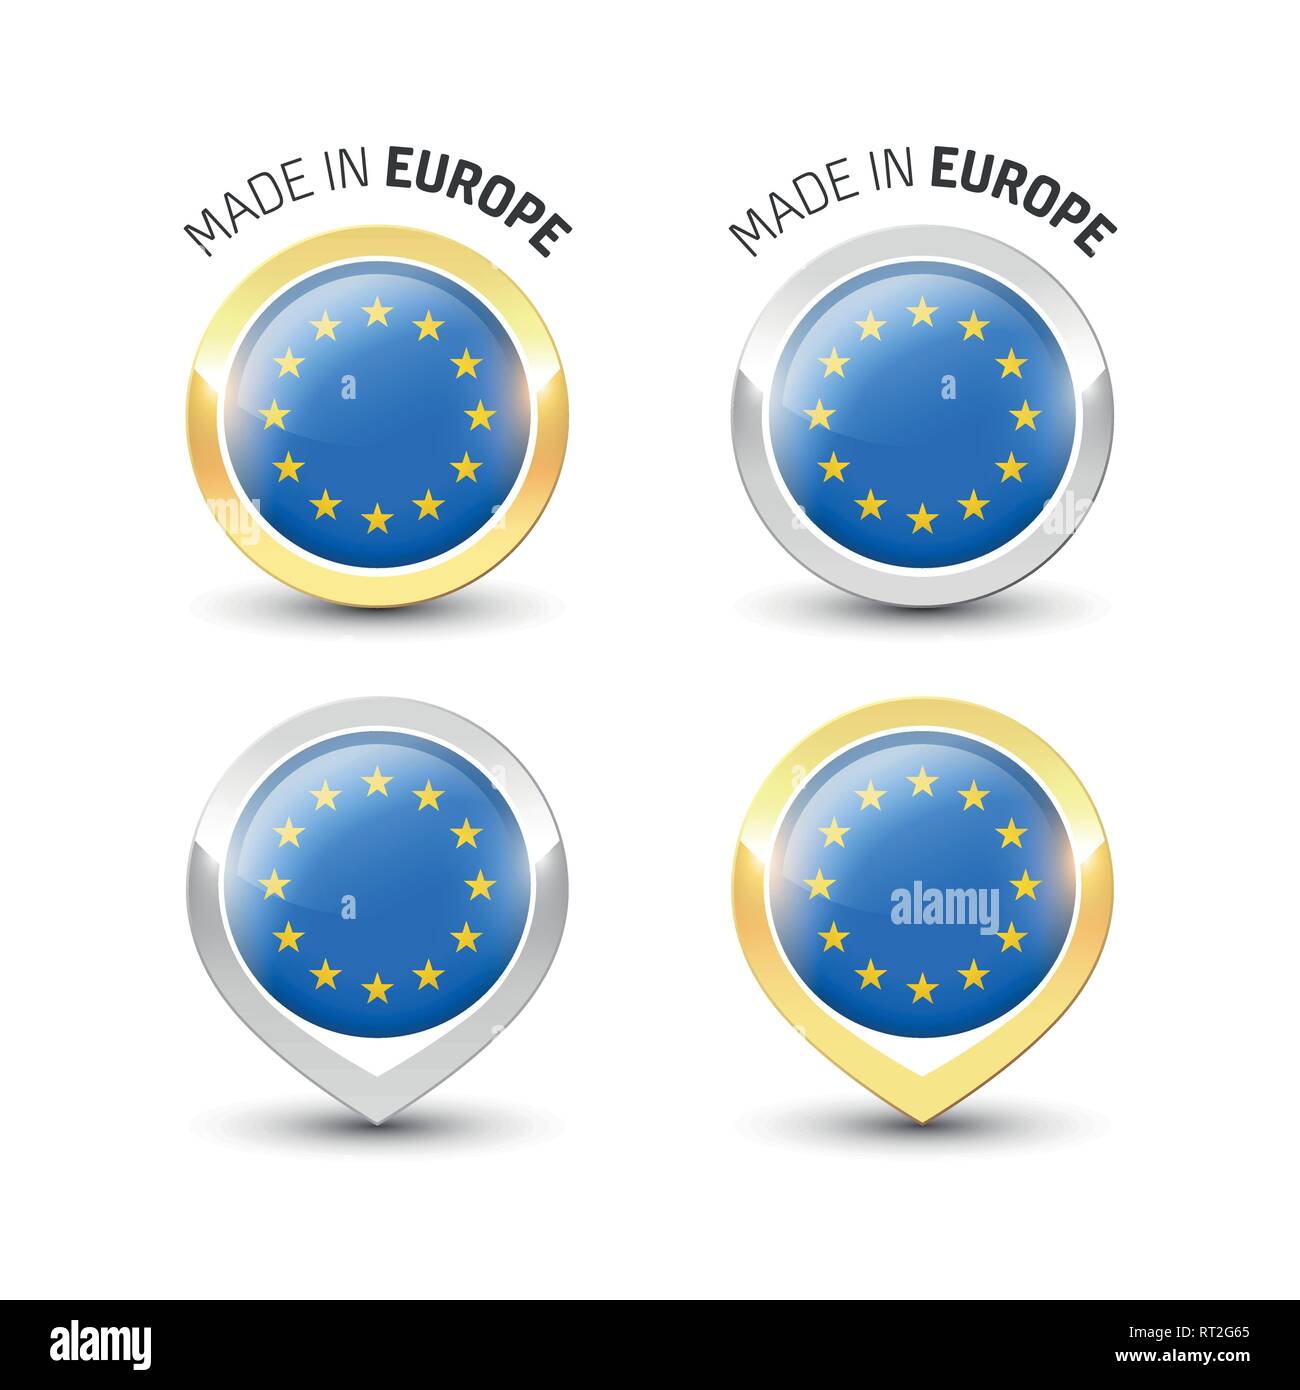 Made in Europe EU - Guarantee label with the flag of European Union inside round gold and silver icons. Stock Vector